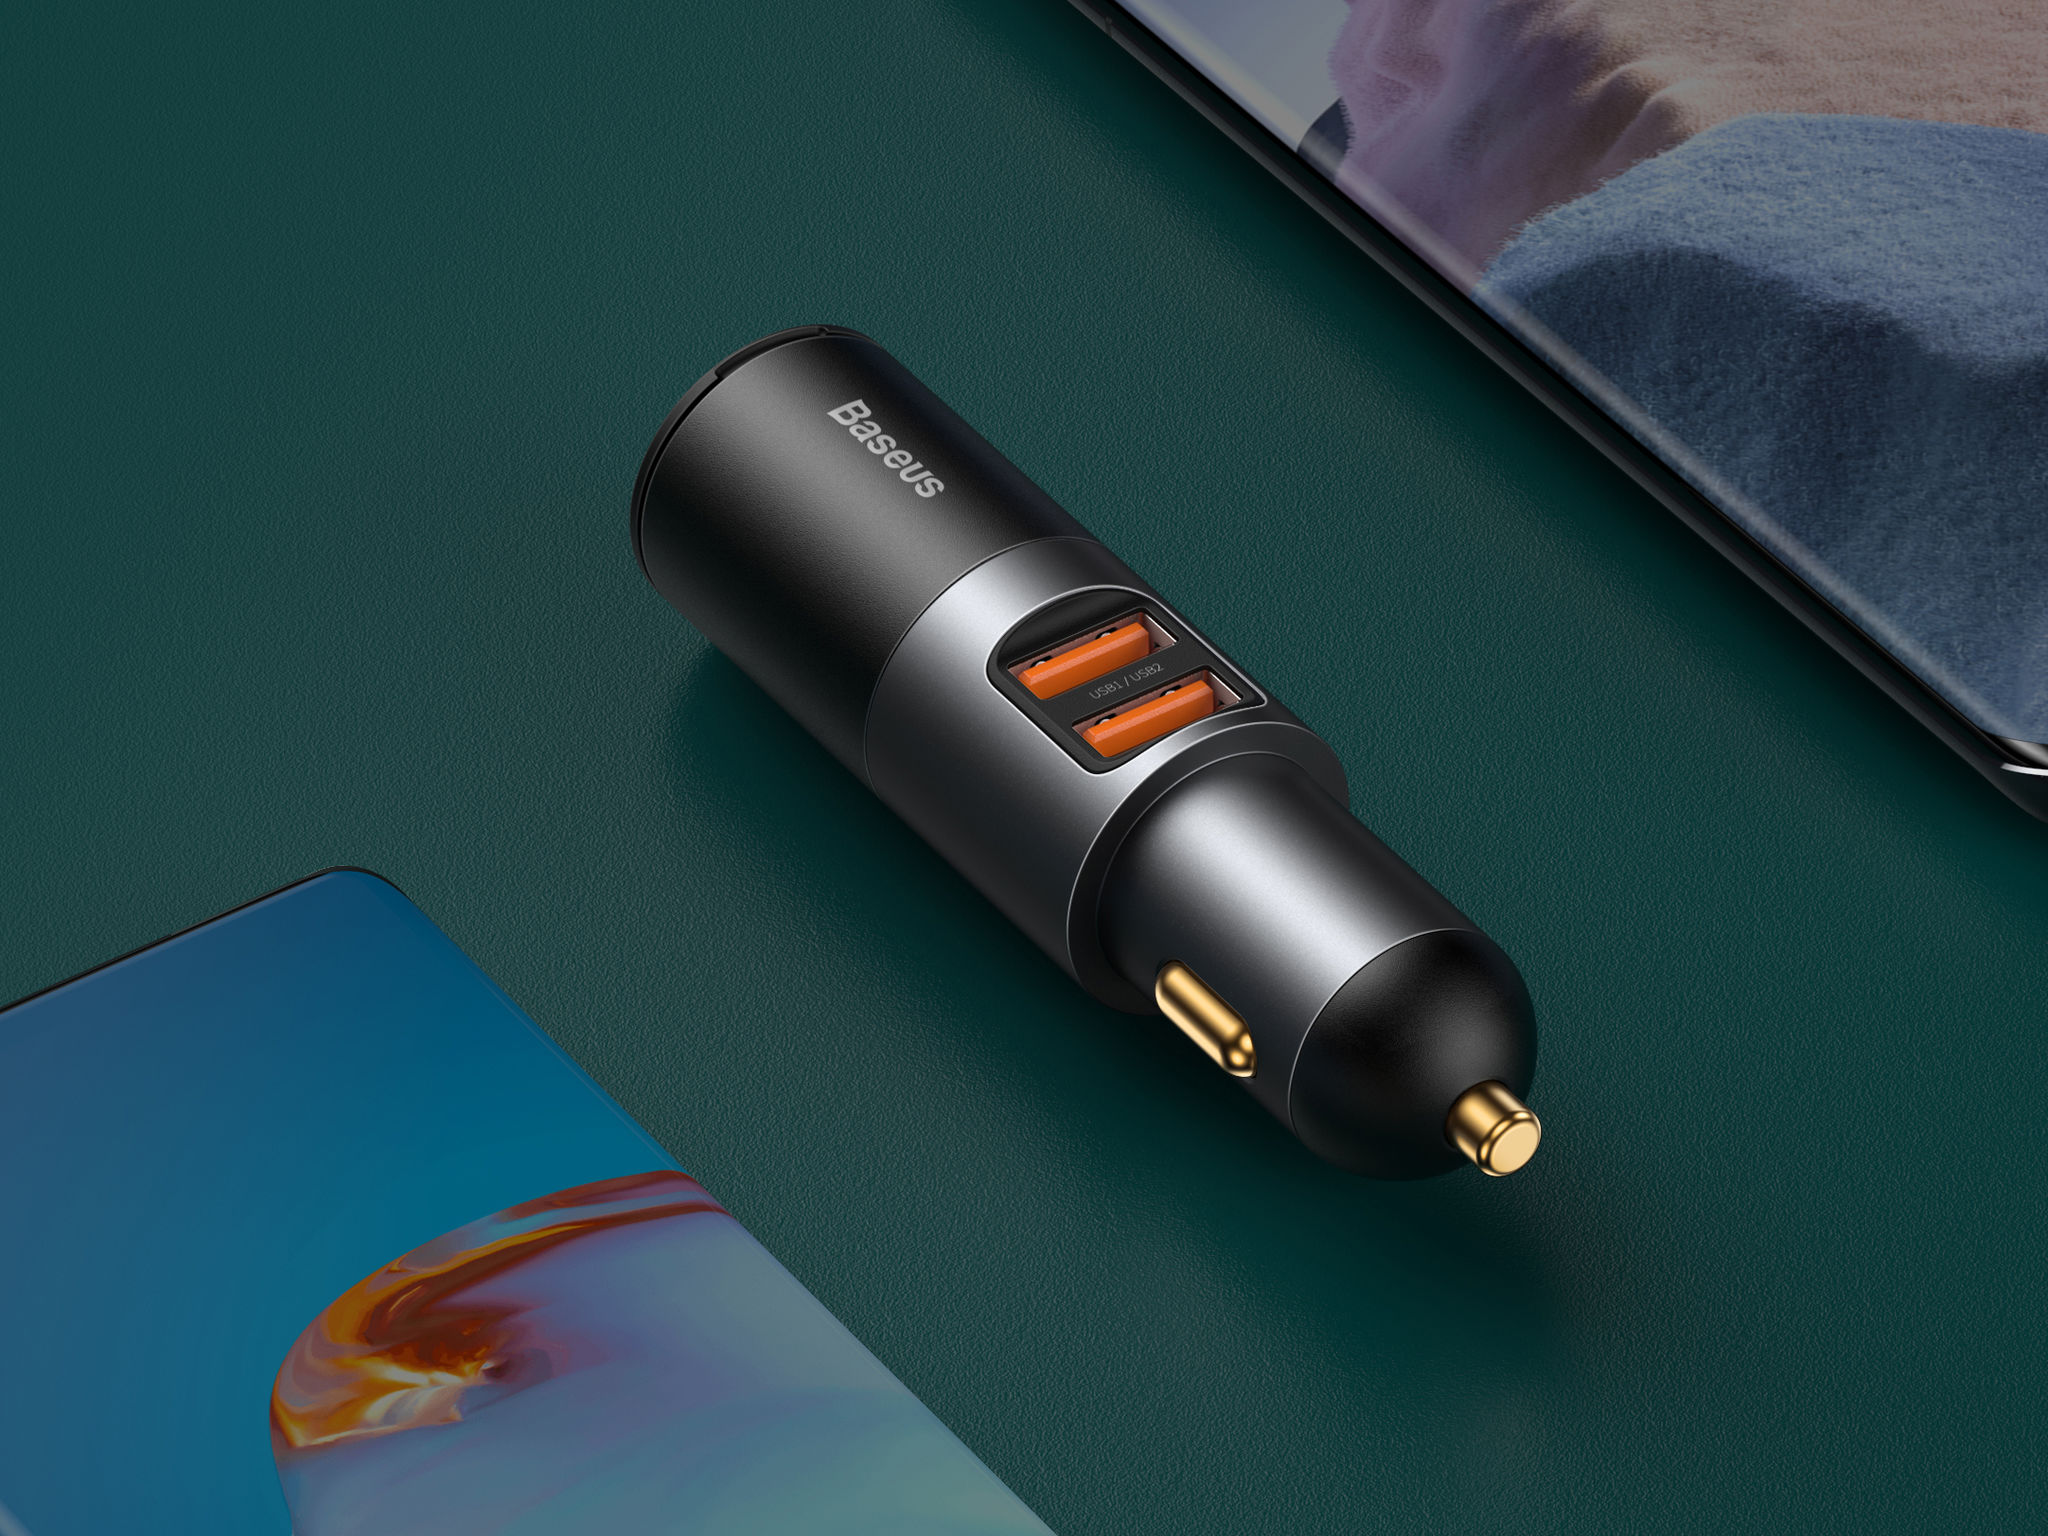 Share Together Fast Charge Car Charger